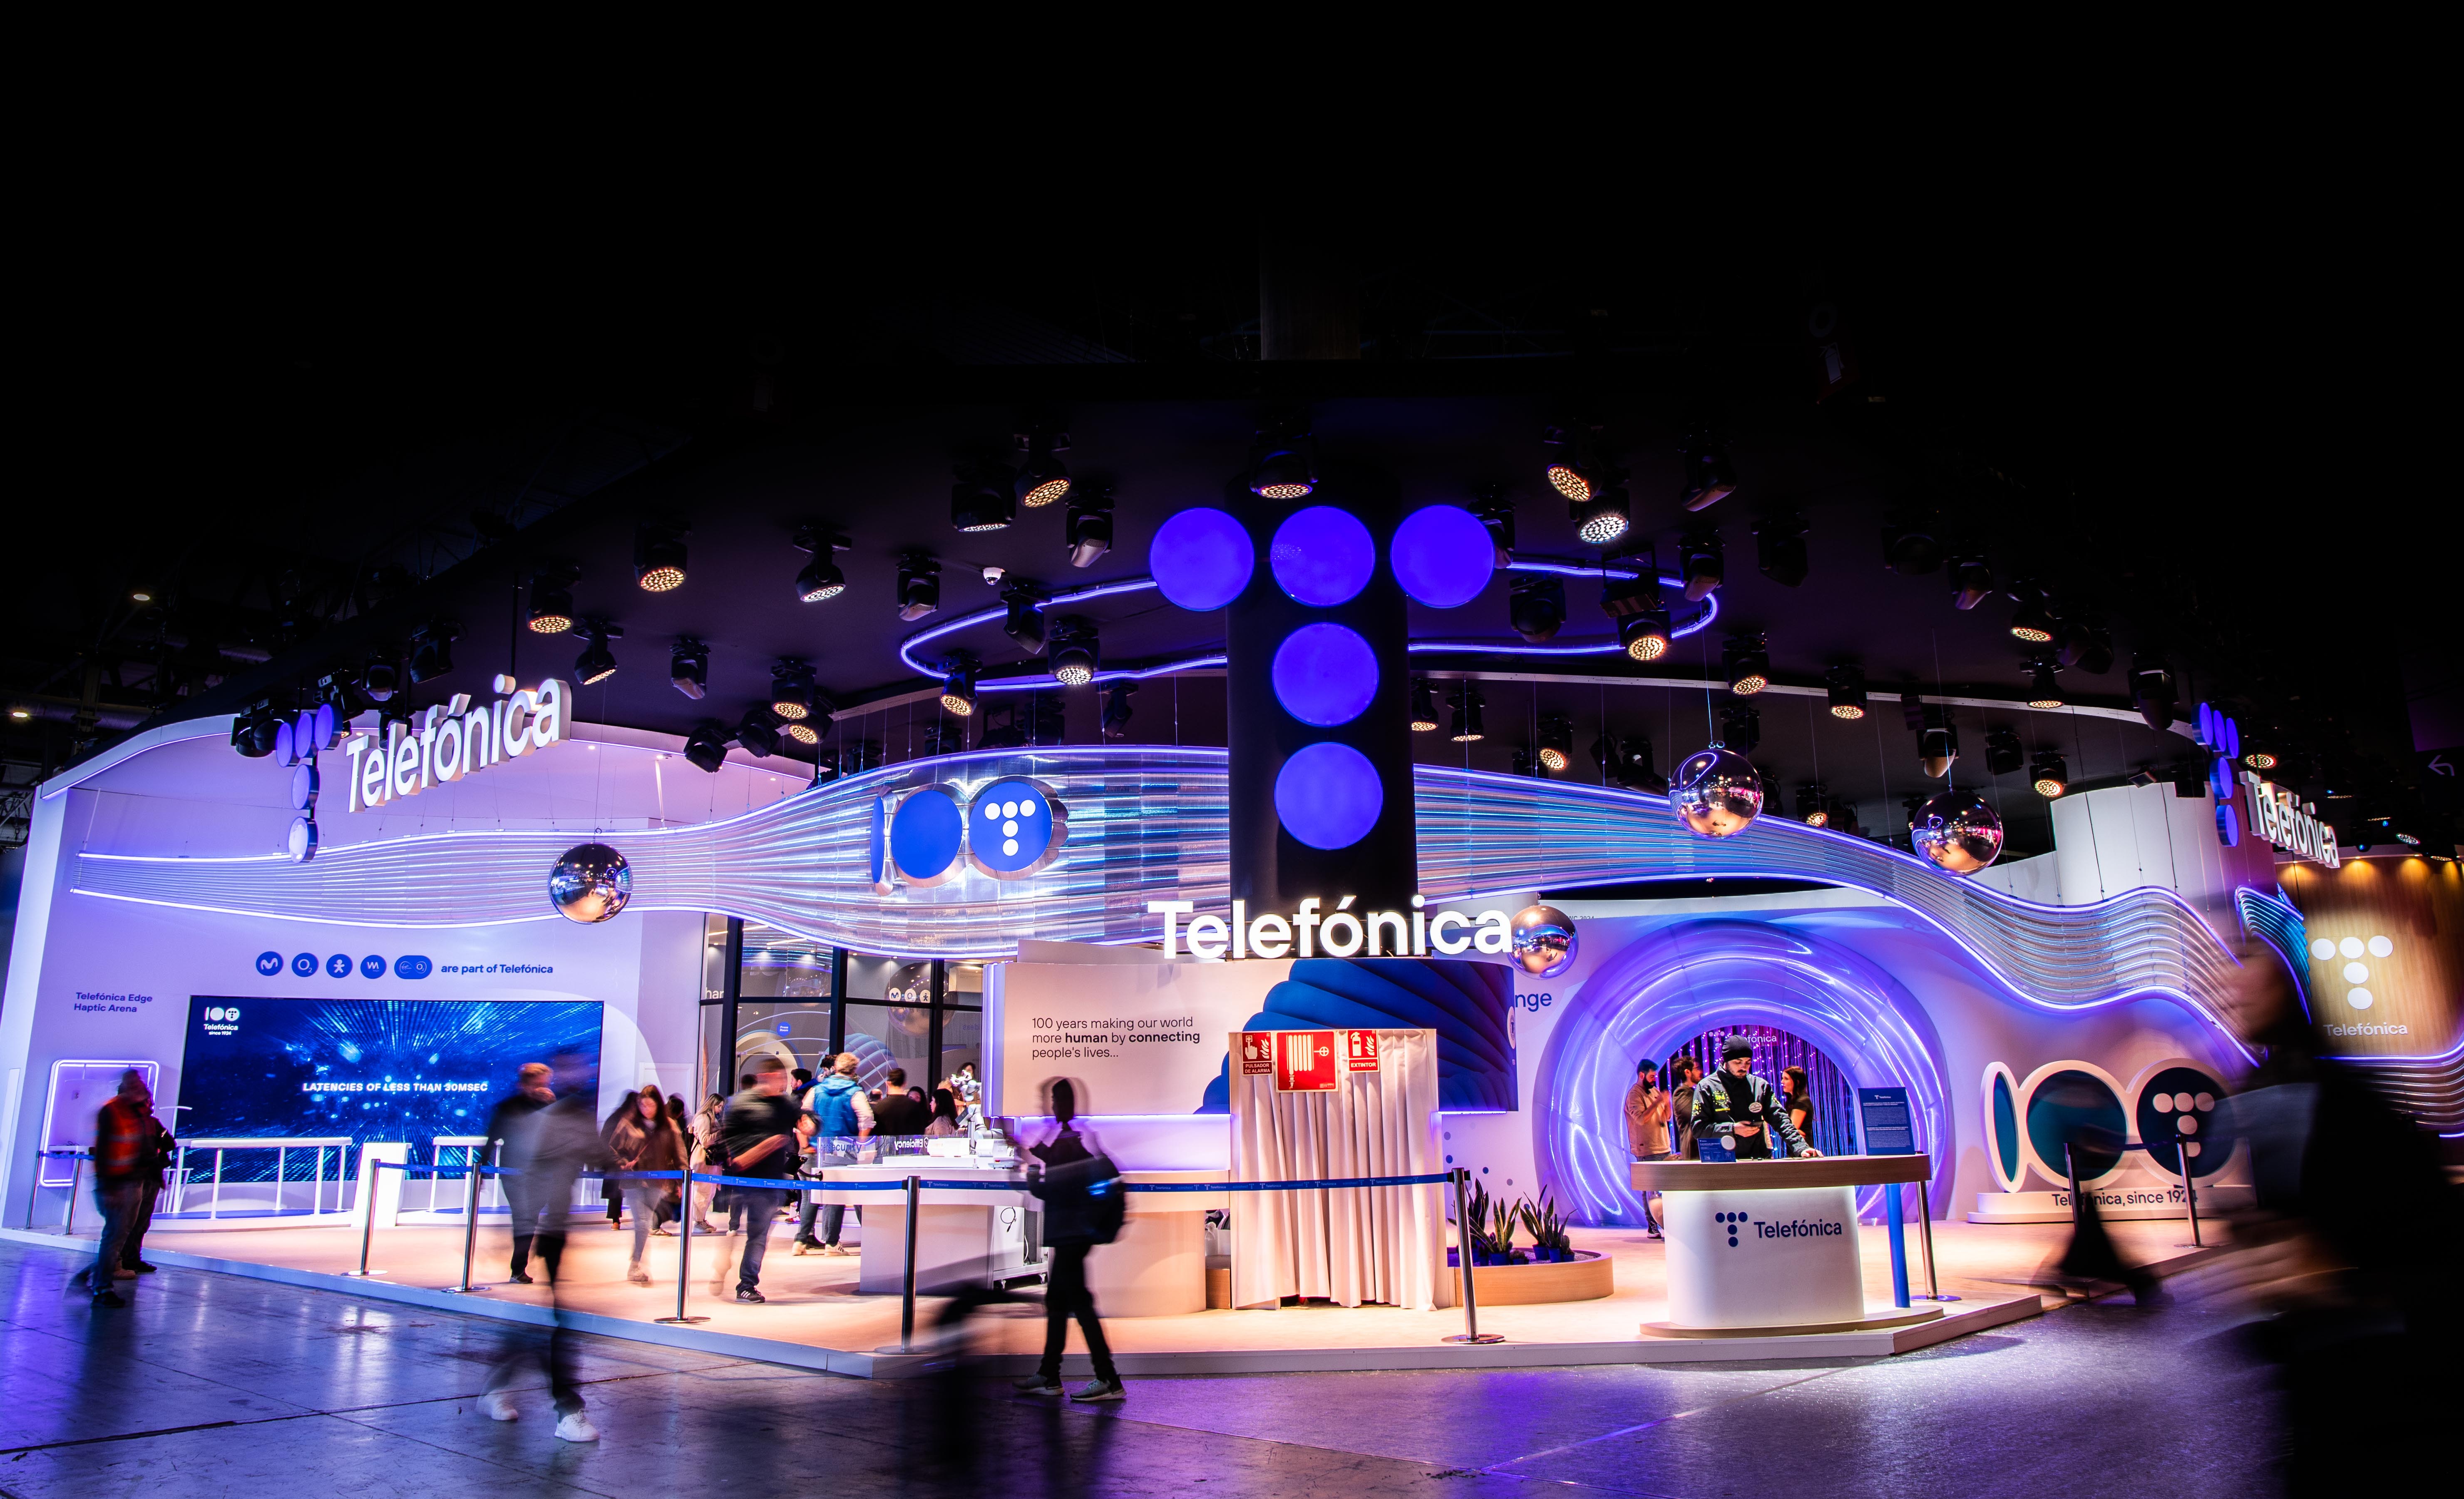 Telefónica presents itself at the MWC under the slogan '100 Years Leading Change', in which it combines its century of knowledge with the most technological vision of this digital era.